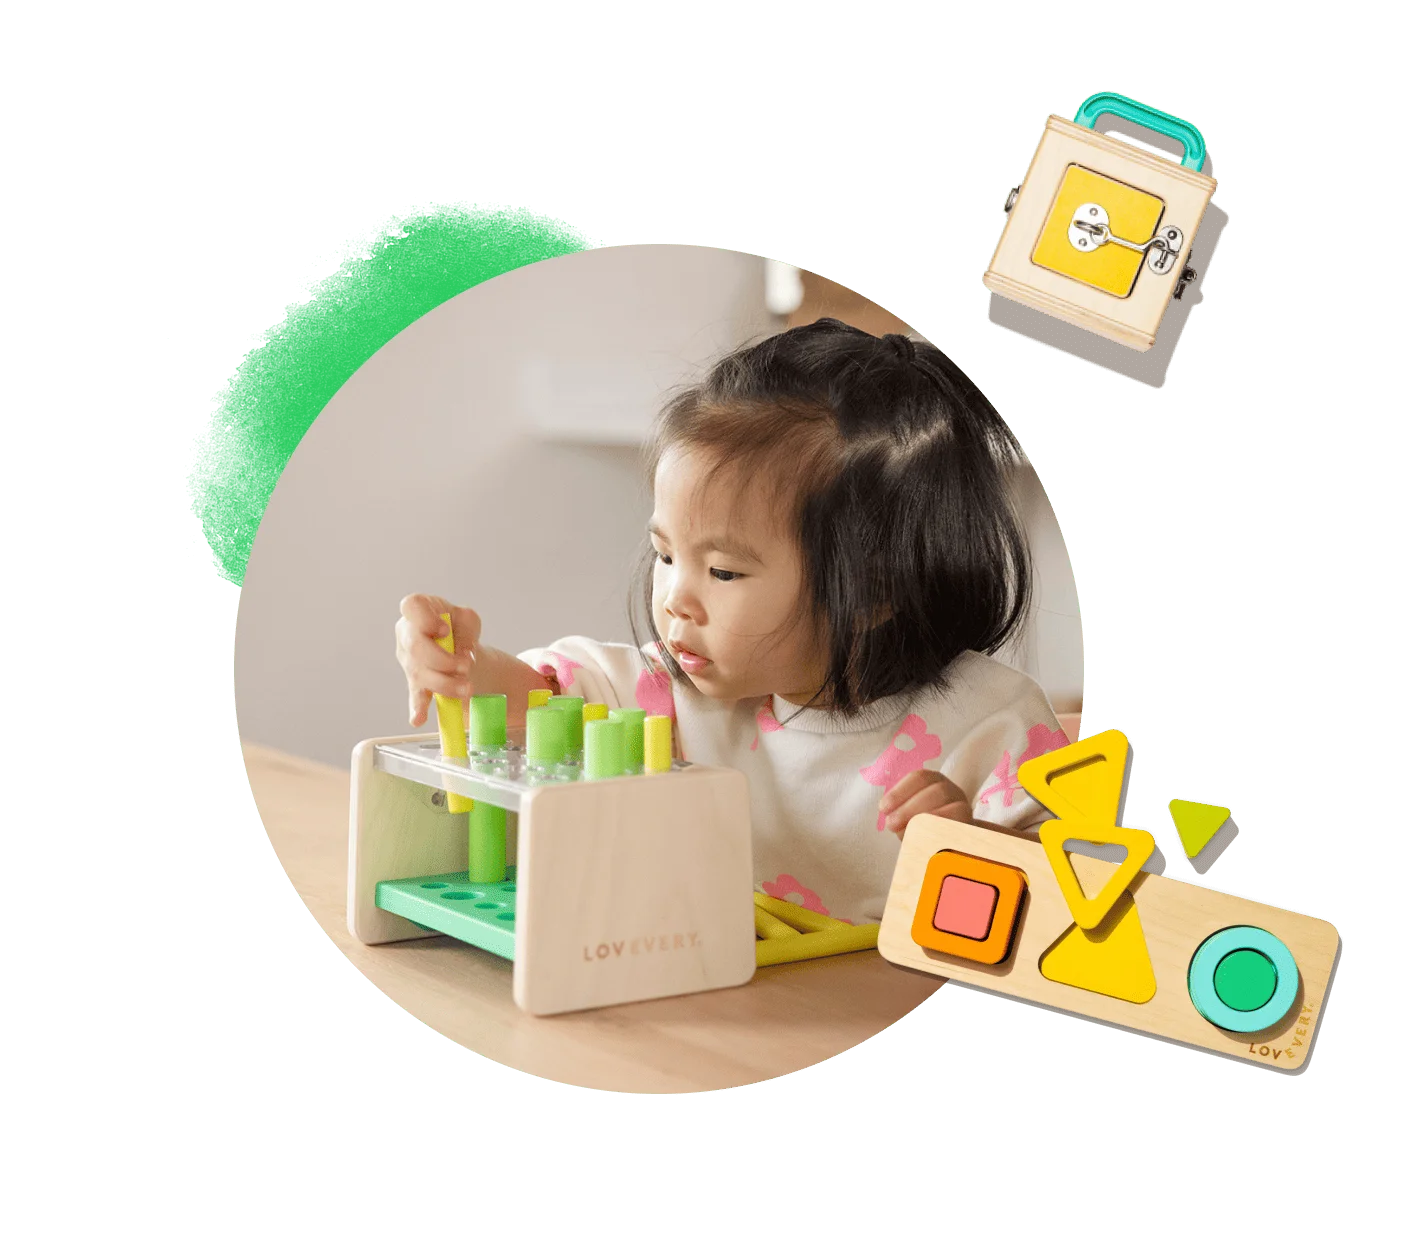 1-year old playing with toys from The Play Kits by Lovevery